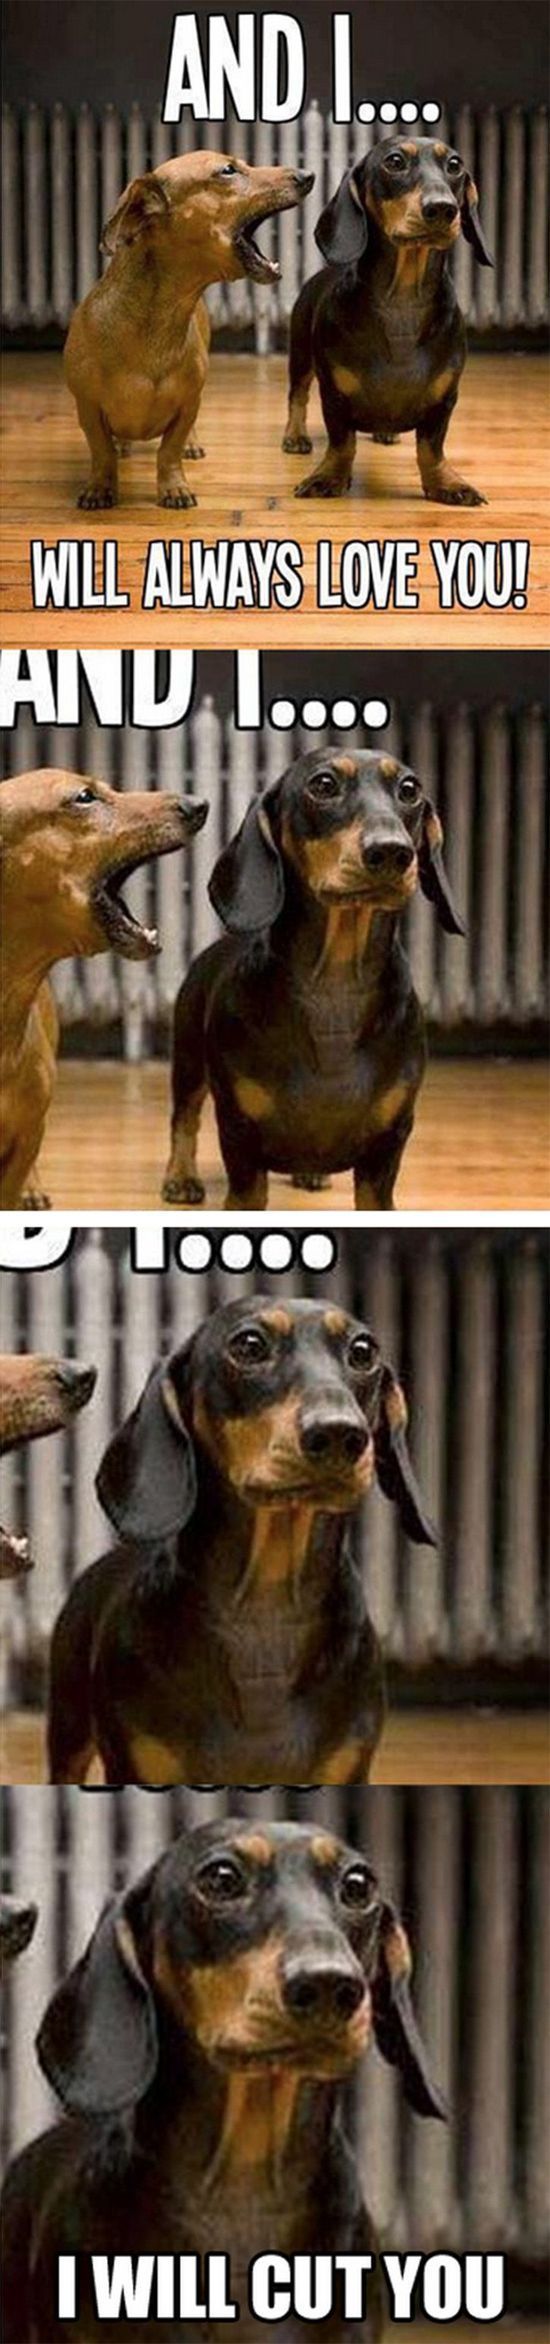 Top 25 Funny Animals Photos and Memes